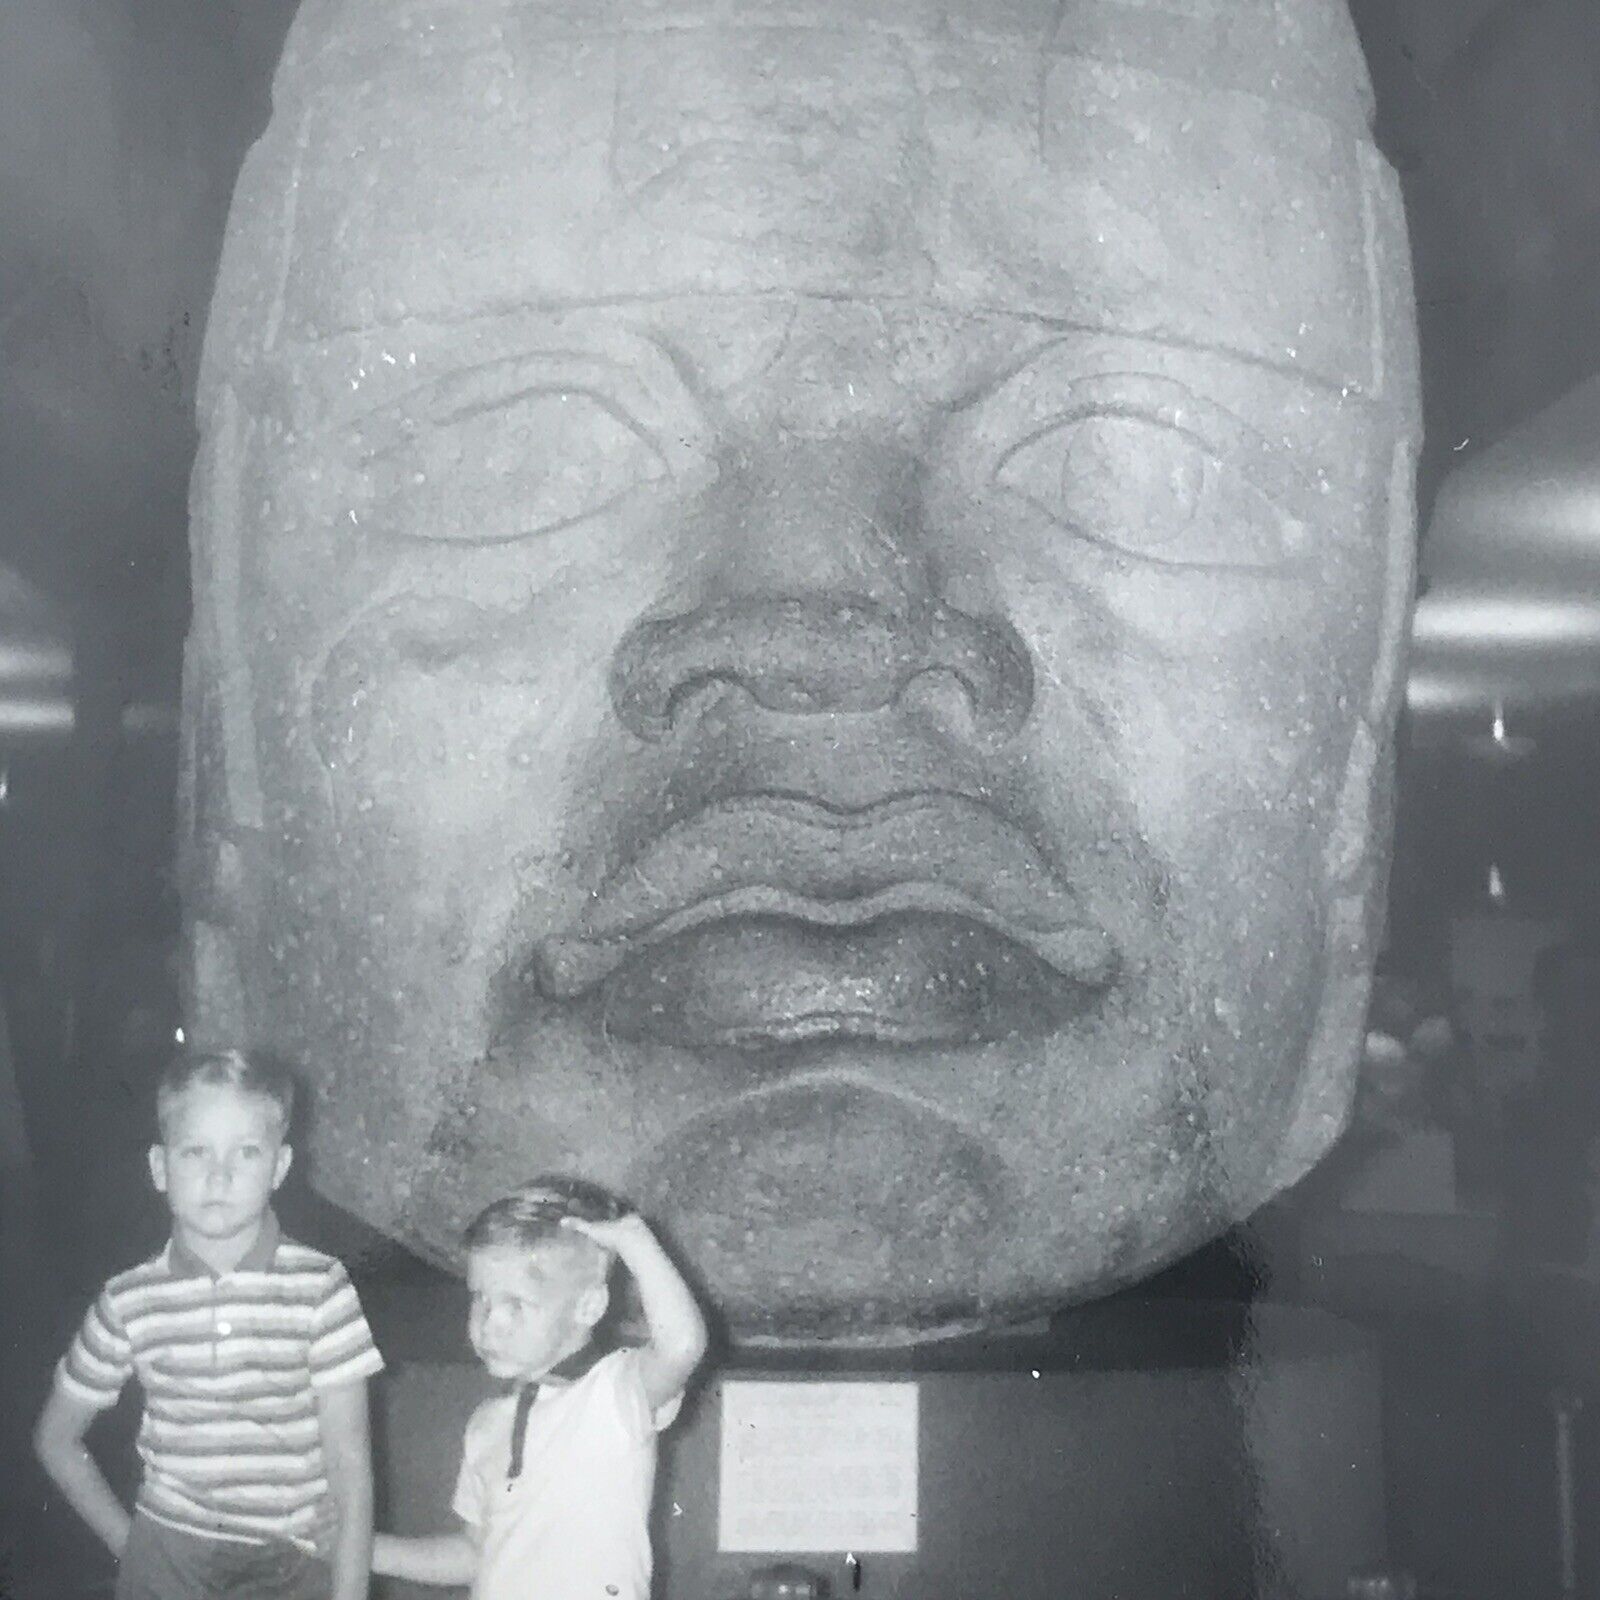 Vintage 1957 Black and White Photo Olmec Colossal Human Head Sculpture